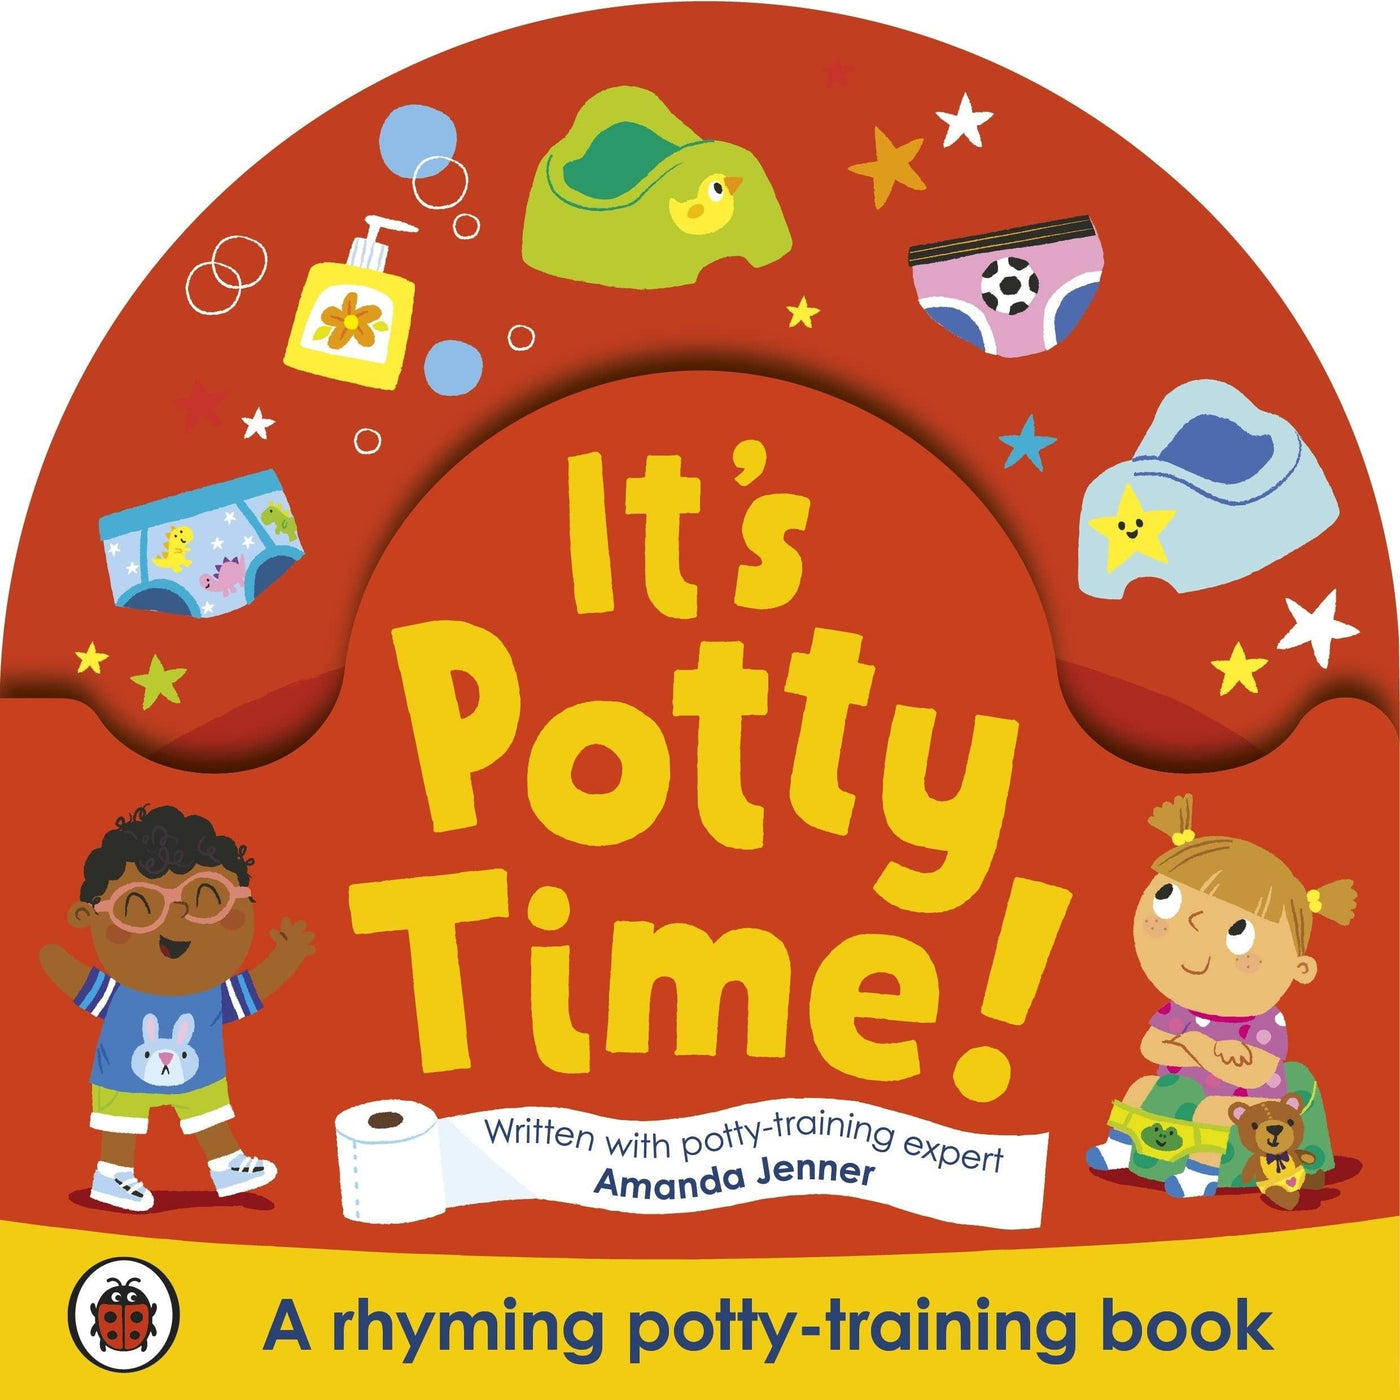 It's Potty Time!: Say "goodbye" to nappies with this potty-training book